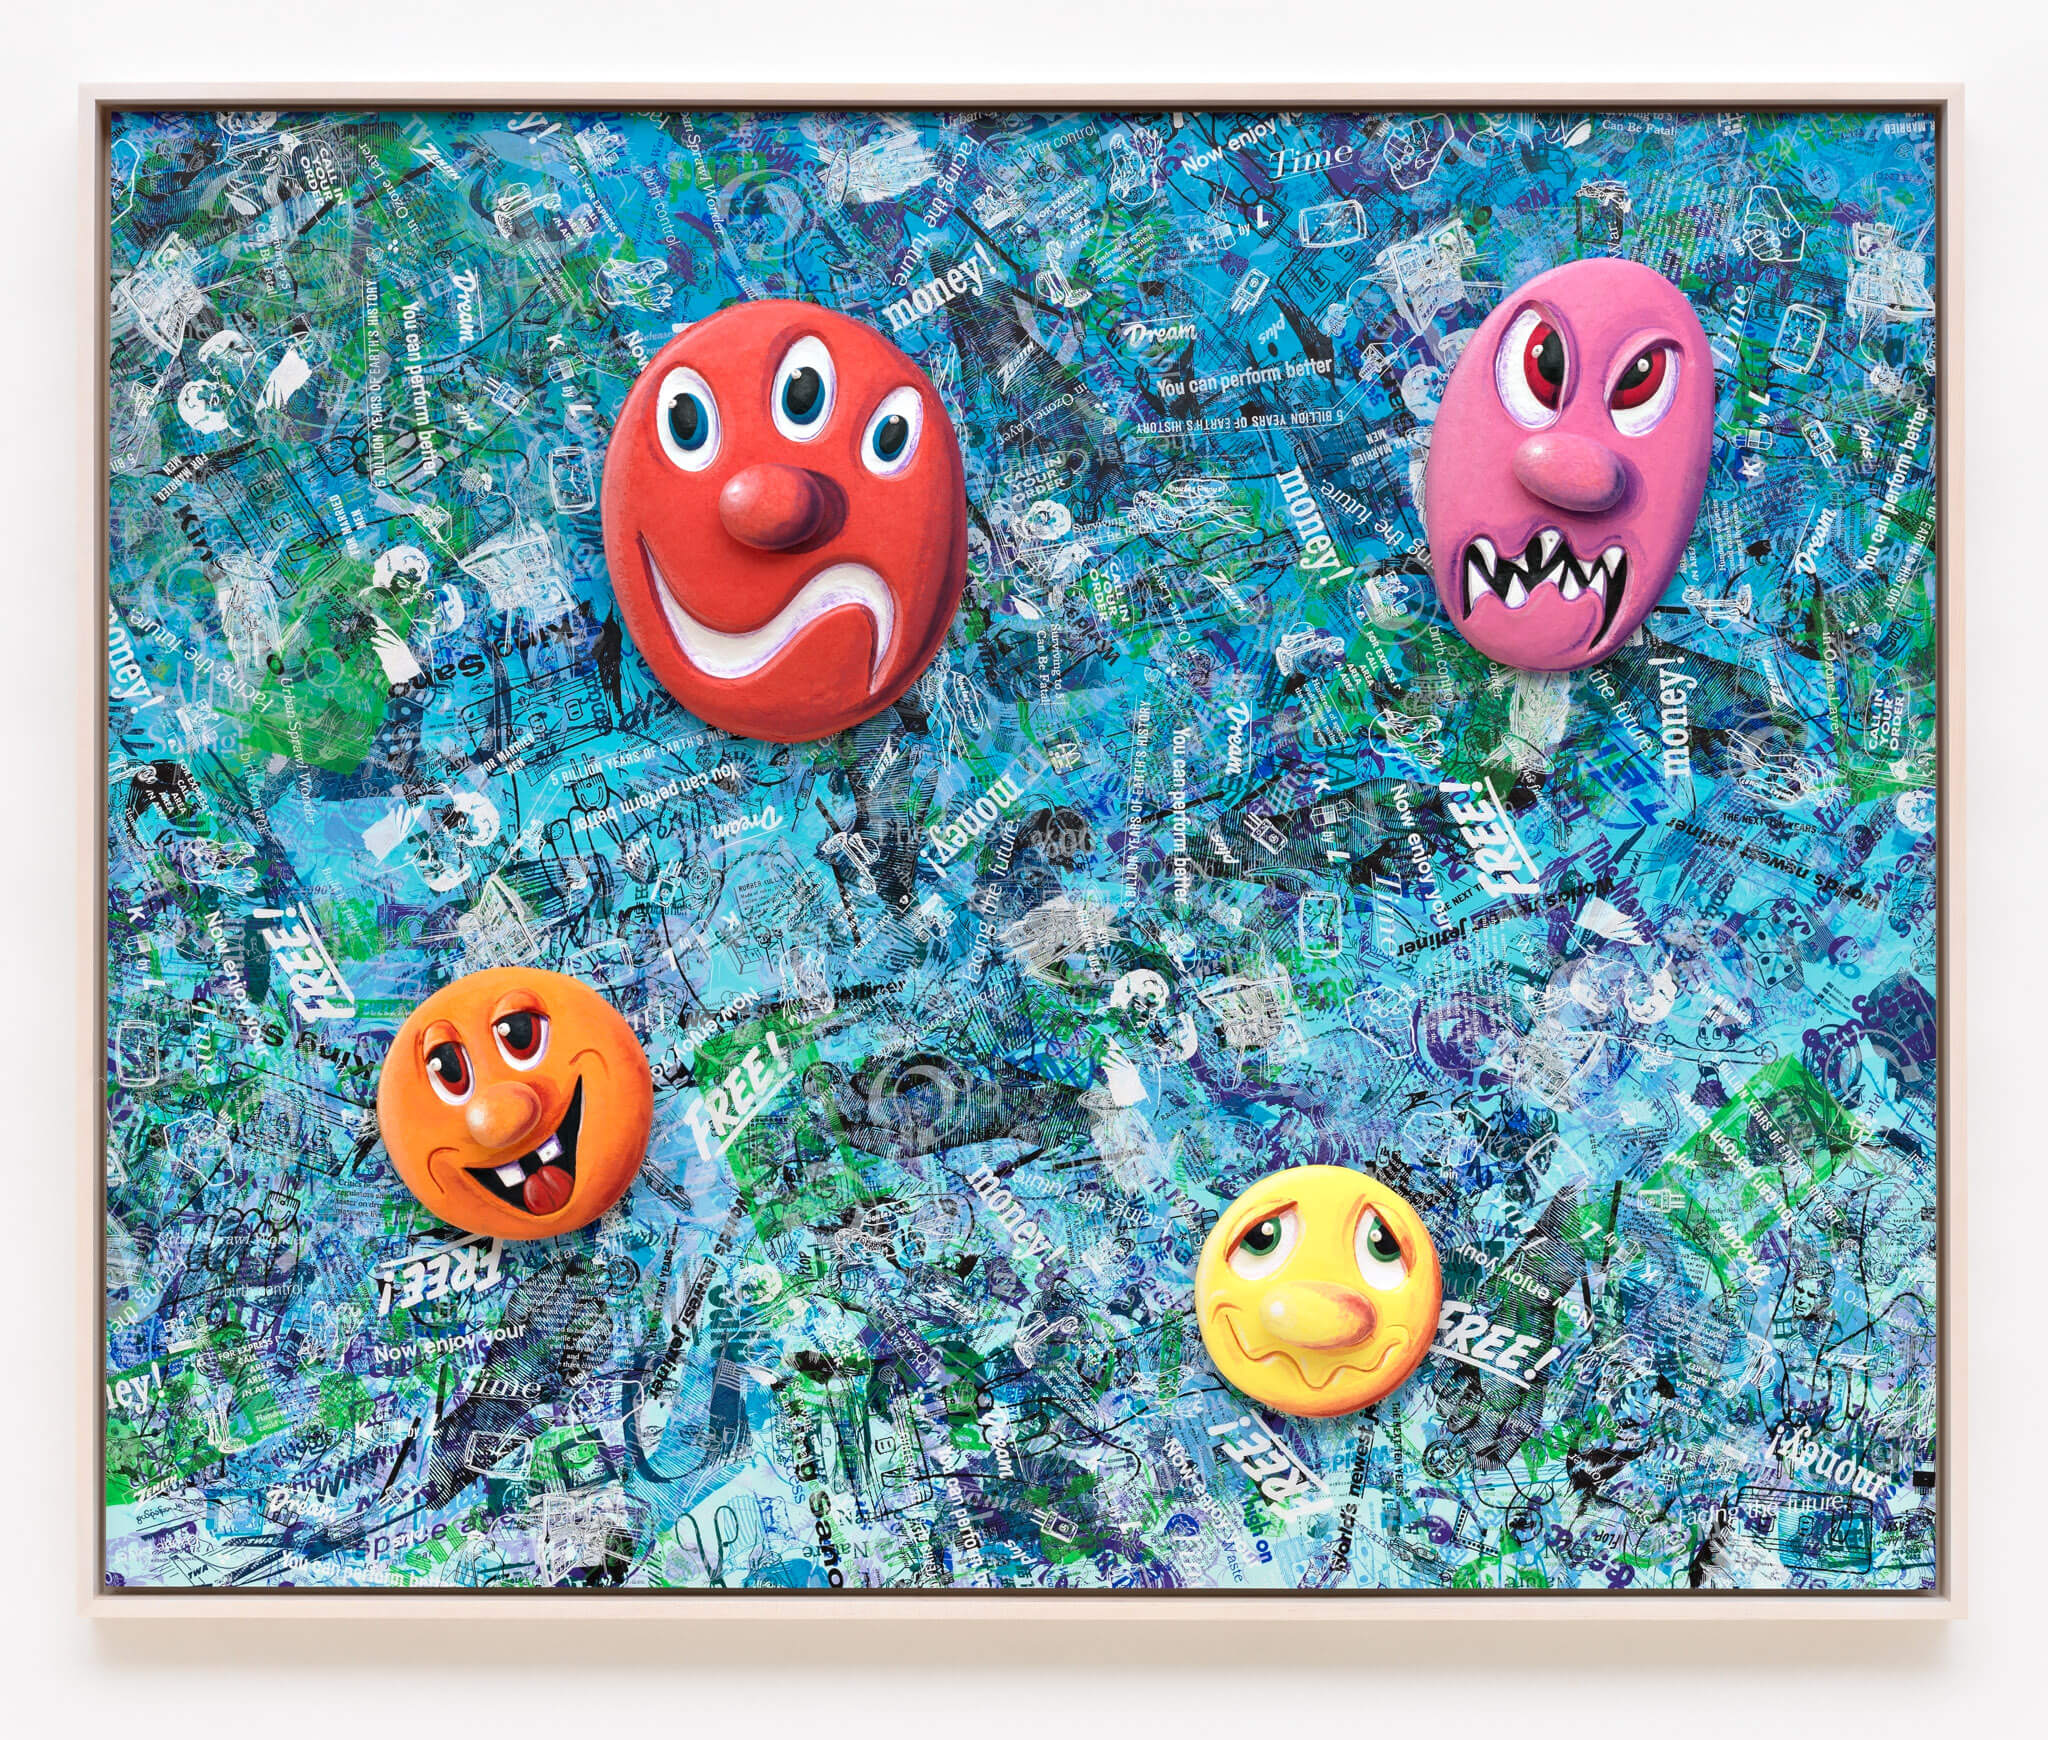 Image of artwork Face Facts #1 by Kenny Scharf